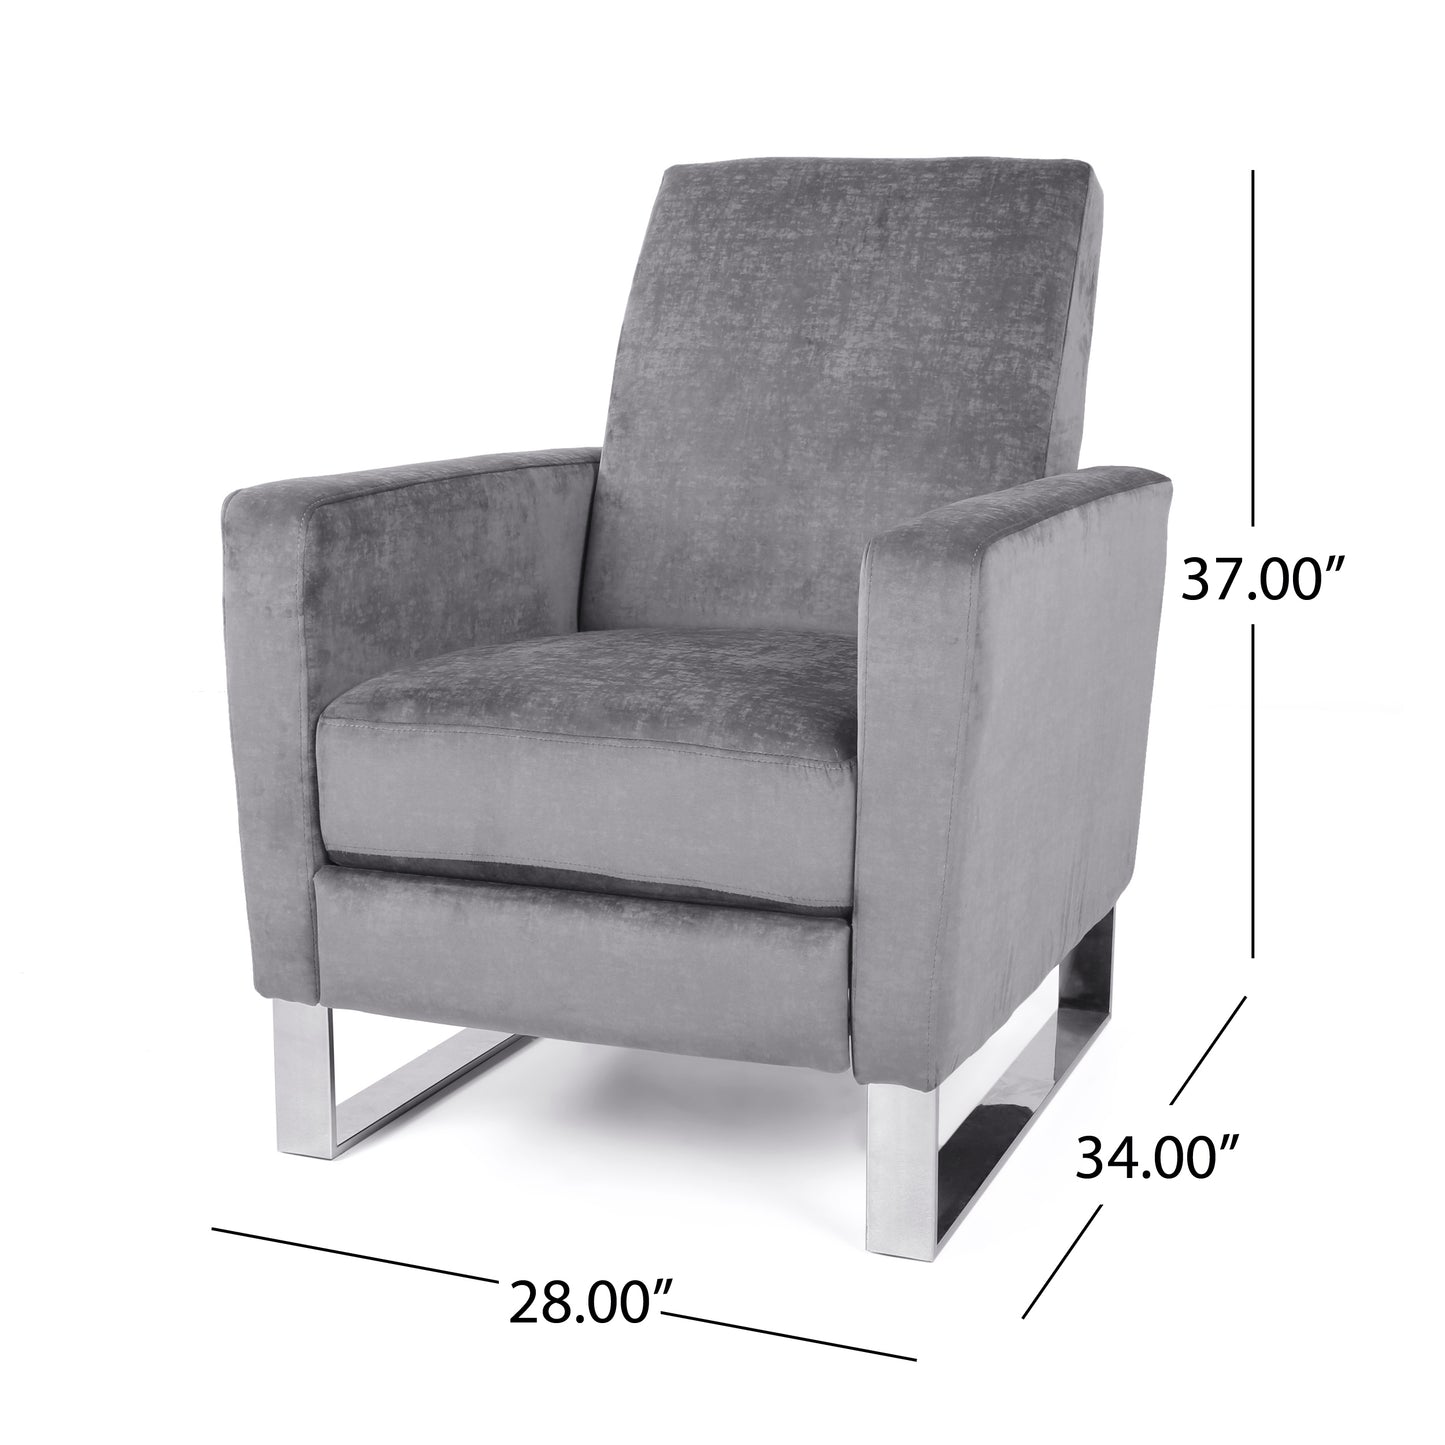 Arvin Modern Push Back High Leg Recliner with Stainless Steel Legs